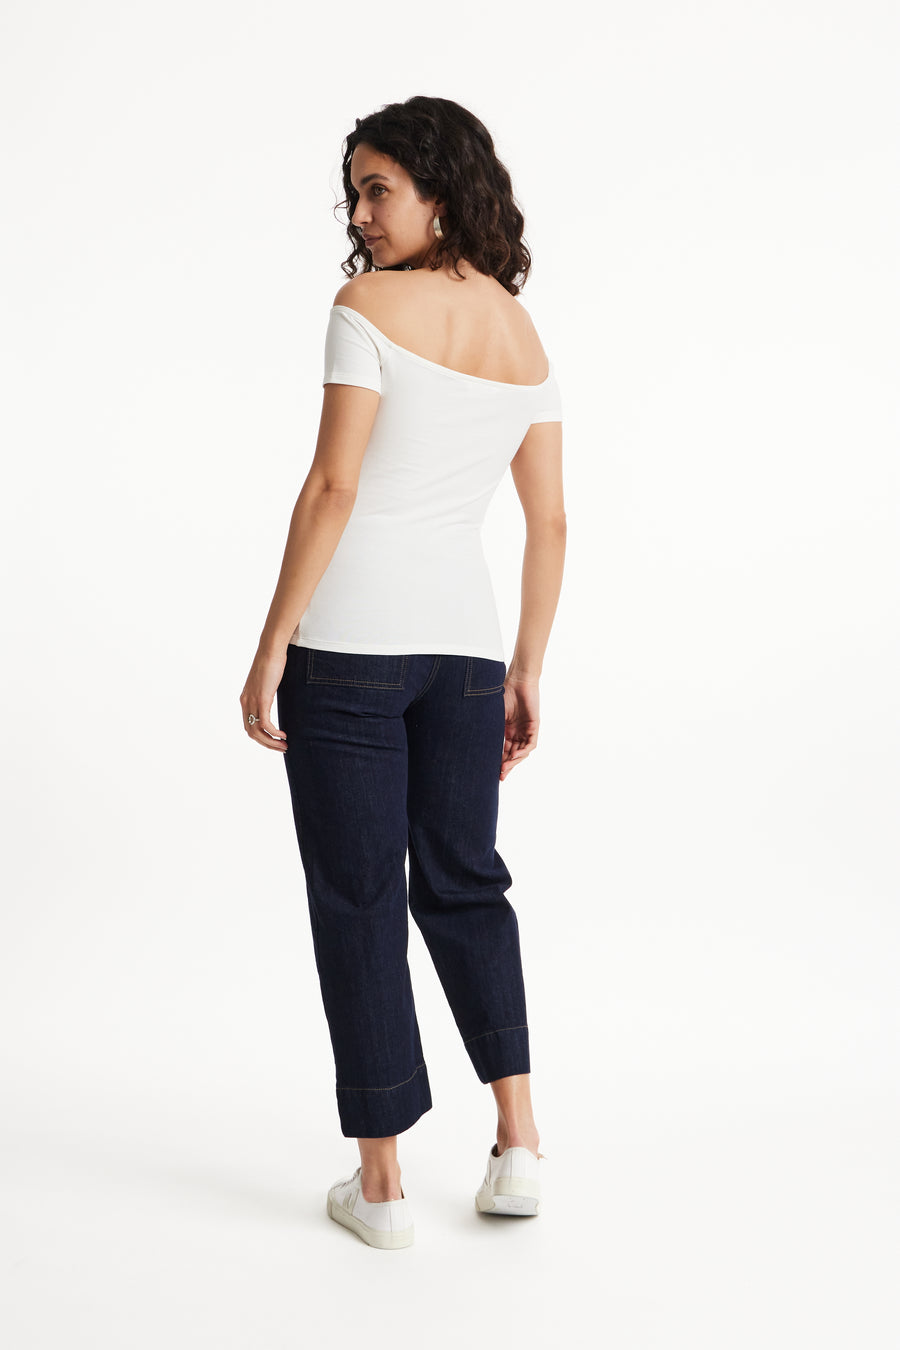 People Tree Fair Trade, Ethical & Sustainable Uma Top in Eco white 95% organic certified cotton, 5% elastane